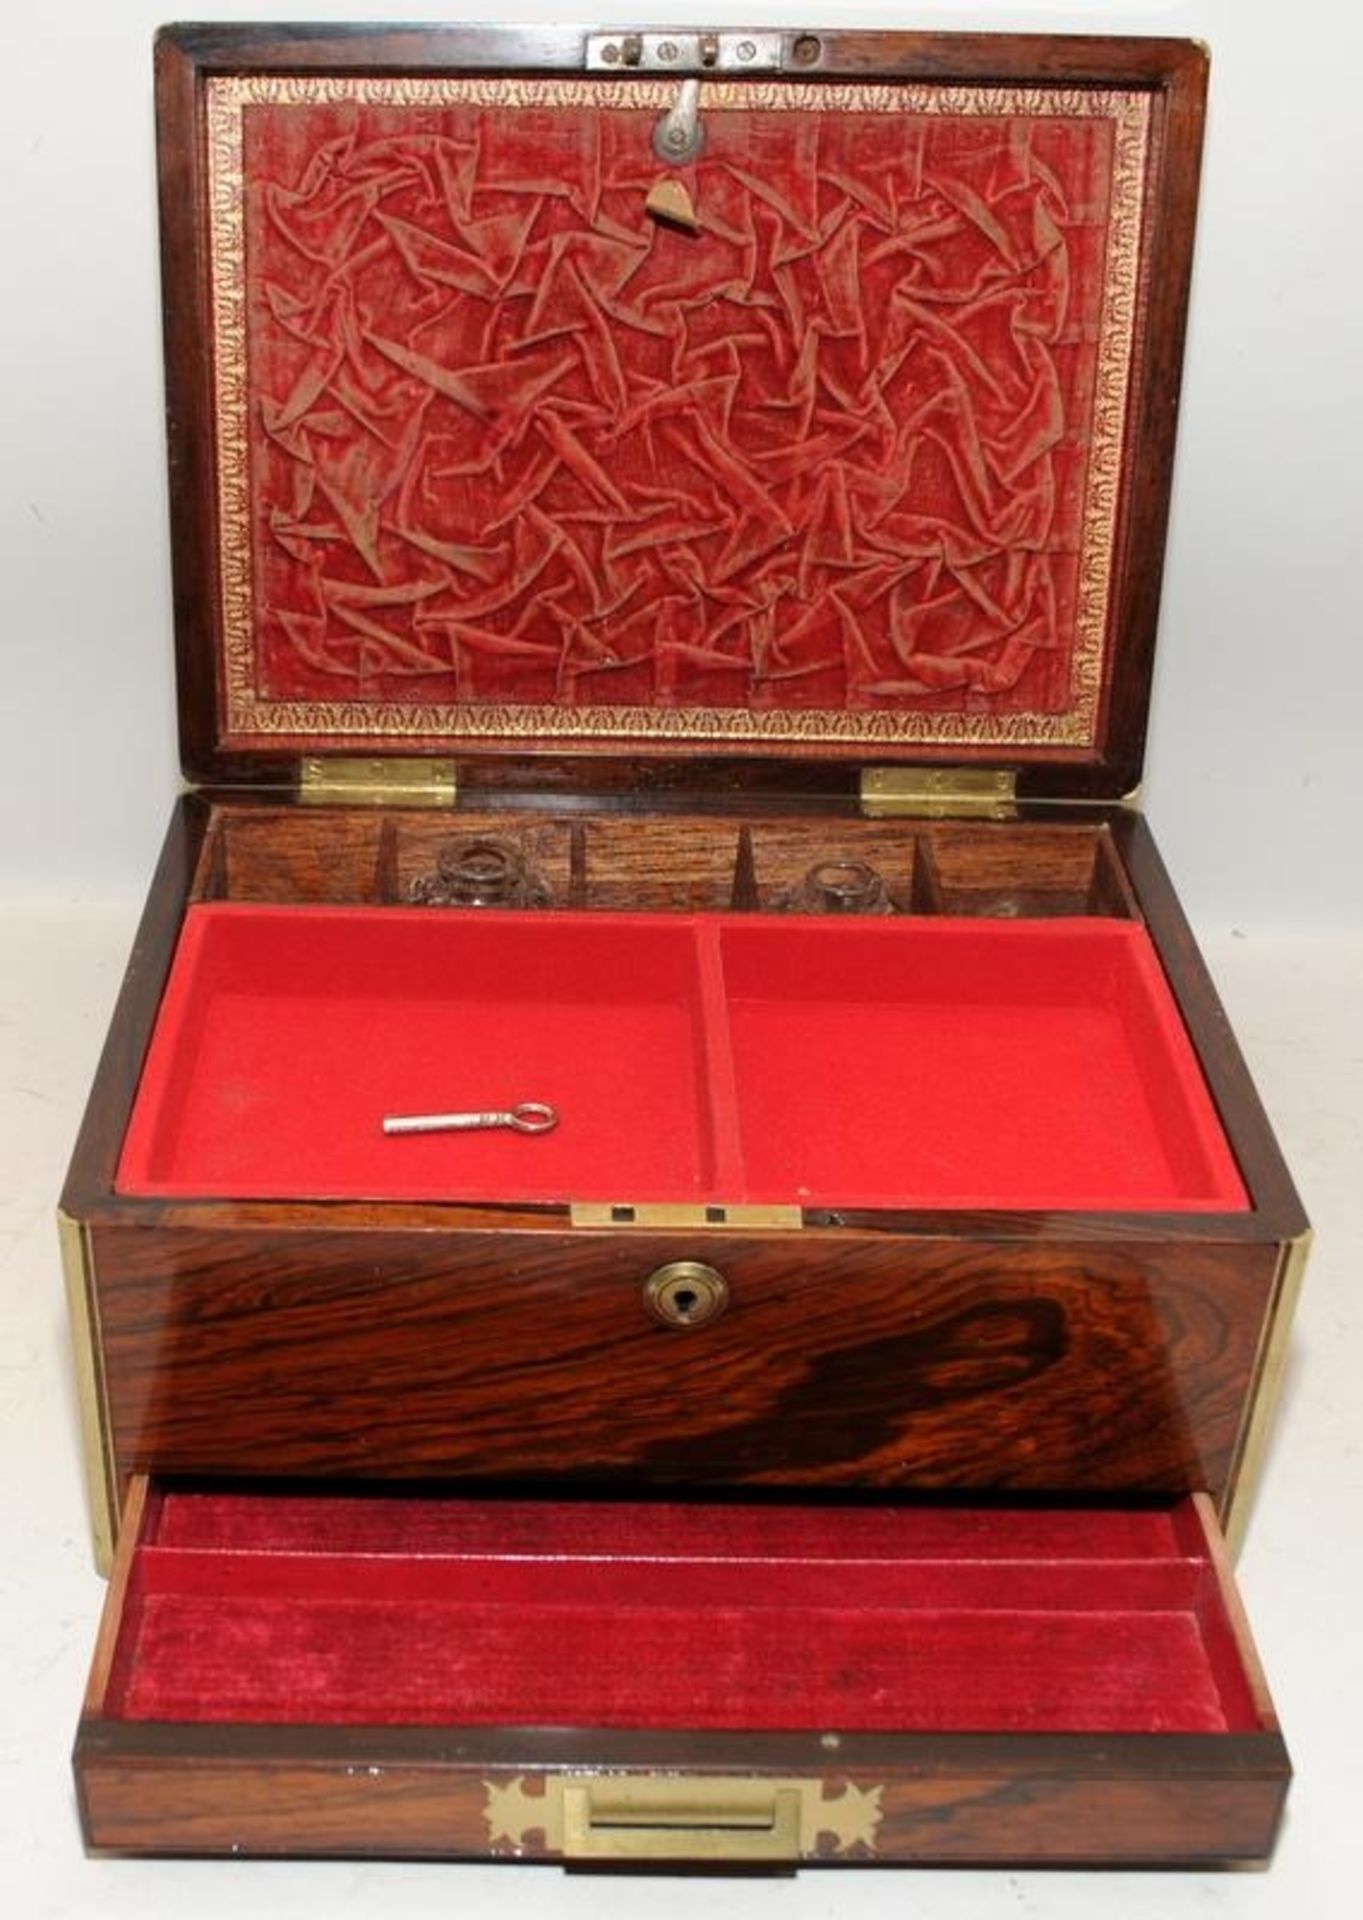 Antique brass bound and inlaid mahogany jewellery box with fitted and lined interior and drawer - Image 2 of 7